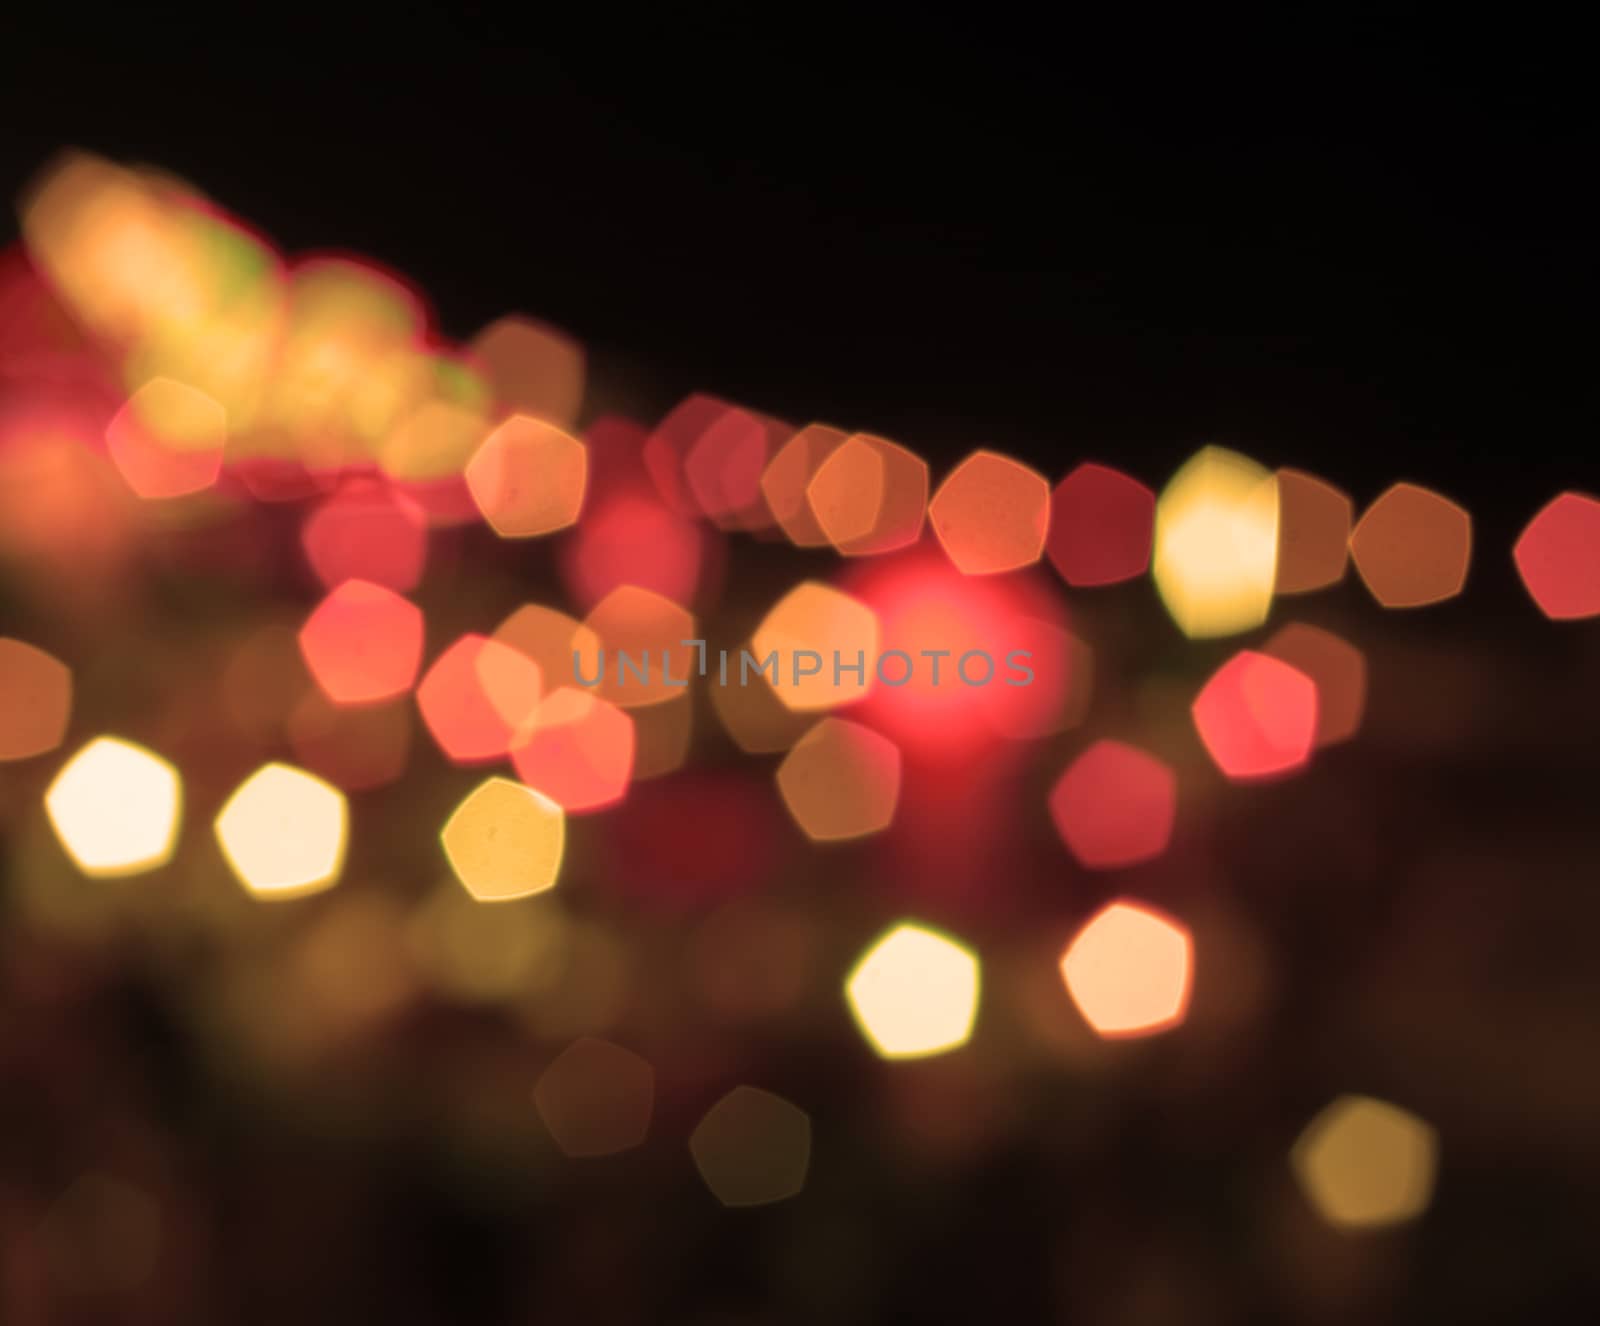 Abstract blurred night lights with vintage filter, stock photo